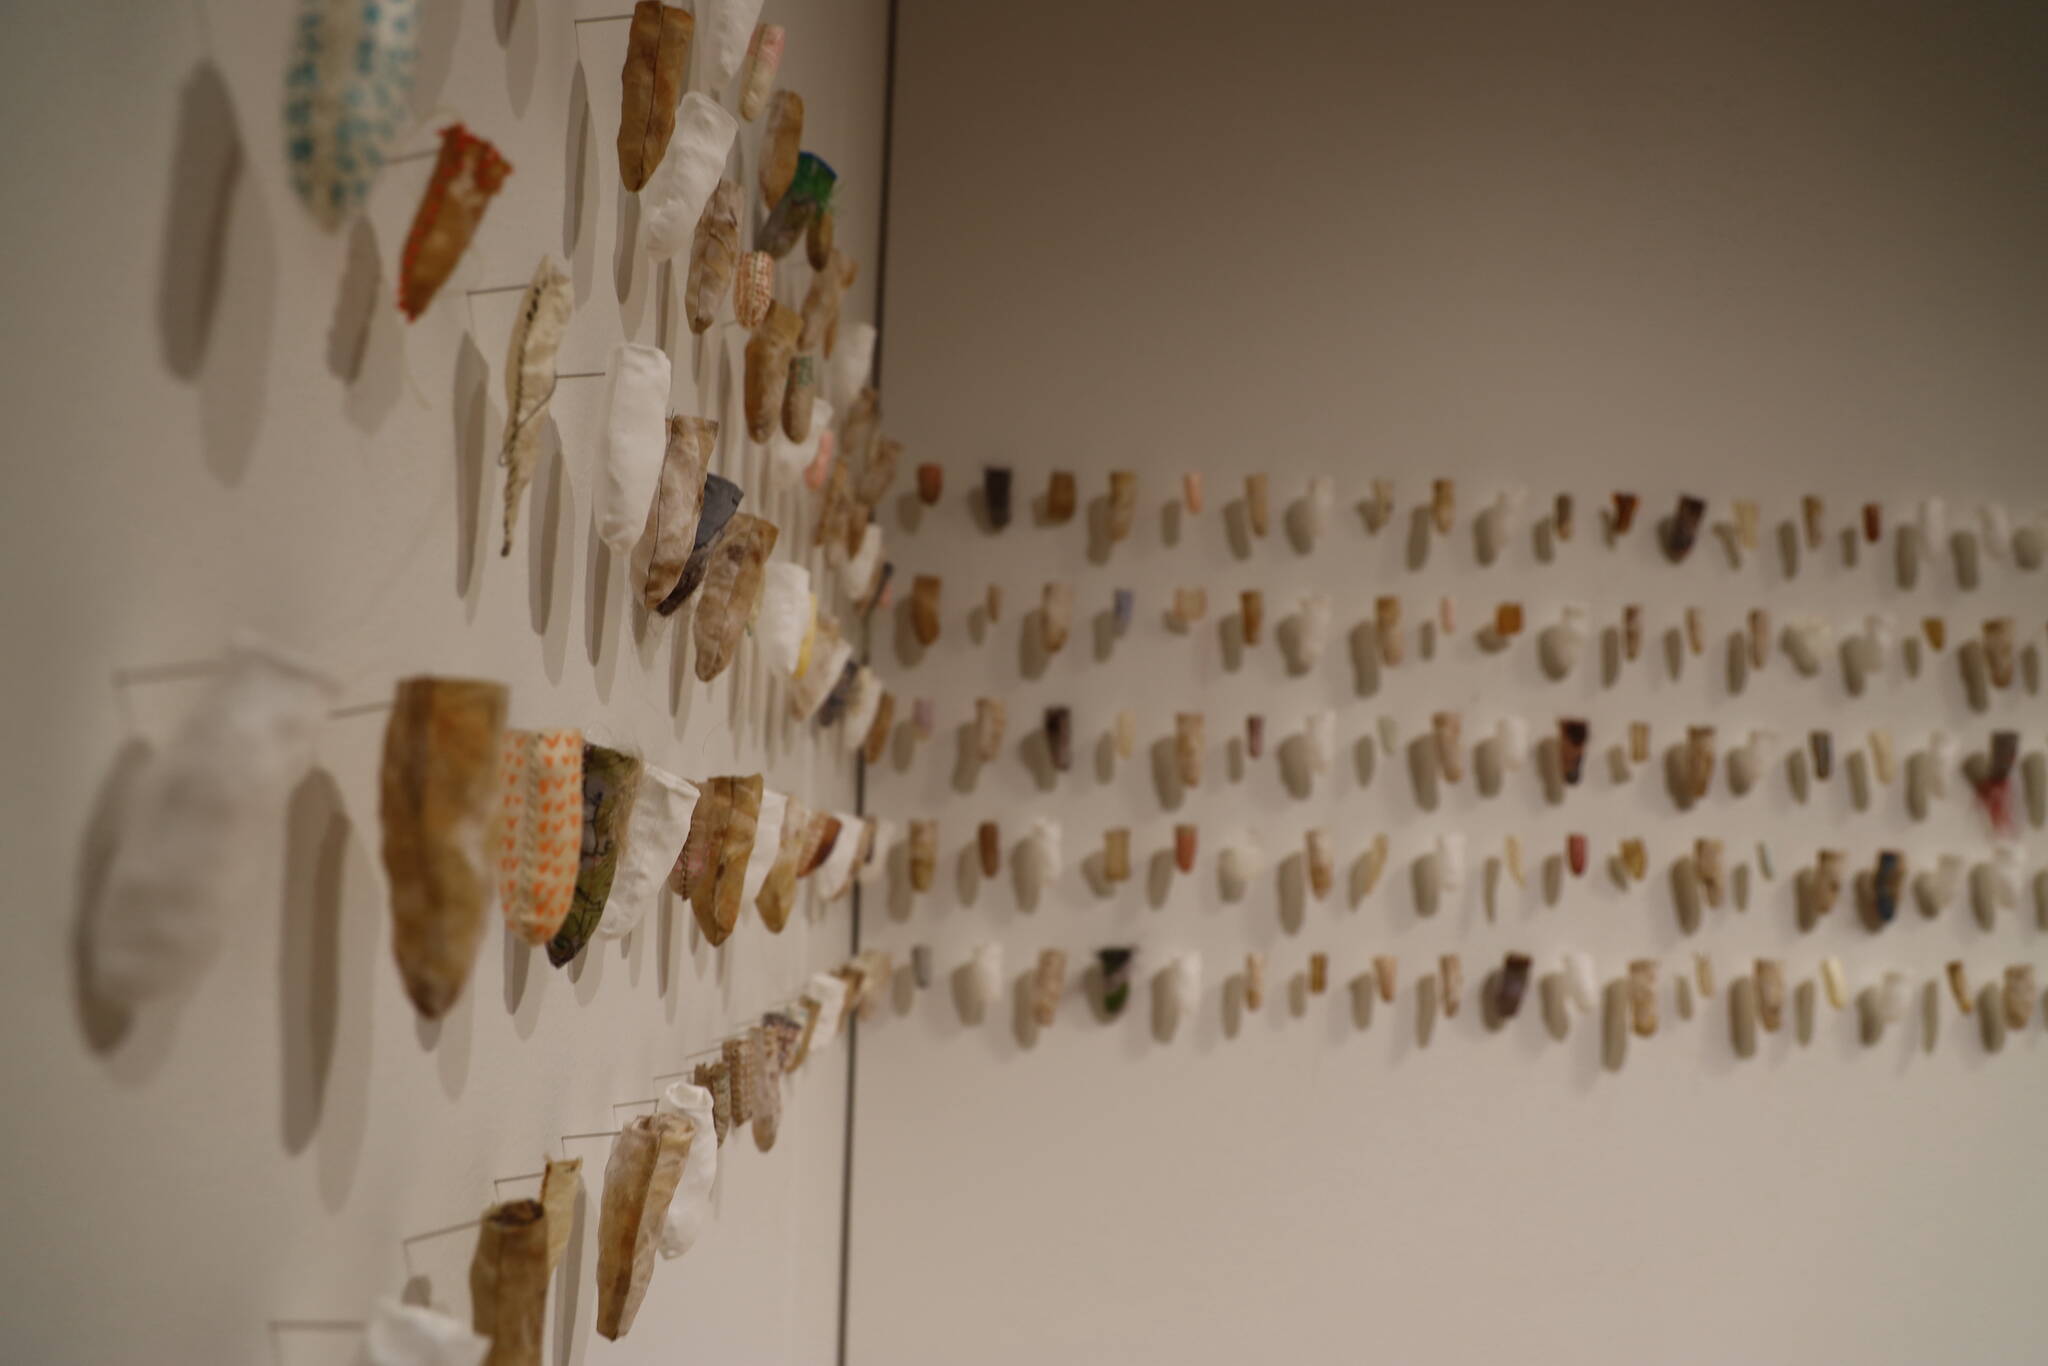 The series “Credible, Small Secrets” features materials including walrus stomach, reindeer and sheep rawhide and human hair to examine the trauma of abuse. The series is a part of the new exhibition “Visceral: Verity” on display at the Alaska State Museum. (Clarise Larson / Juneau Empire)